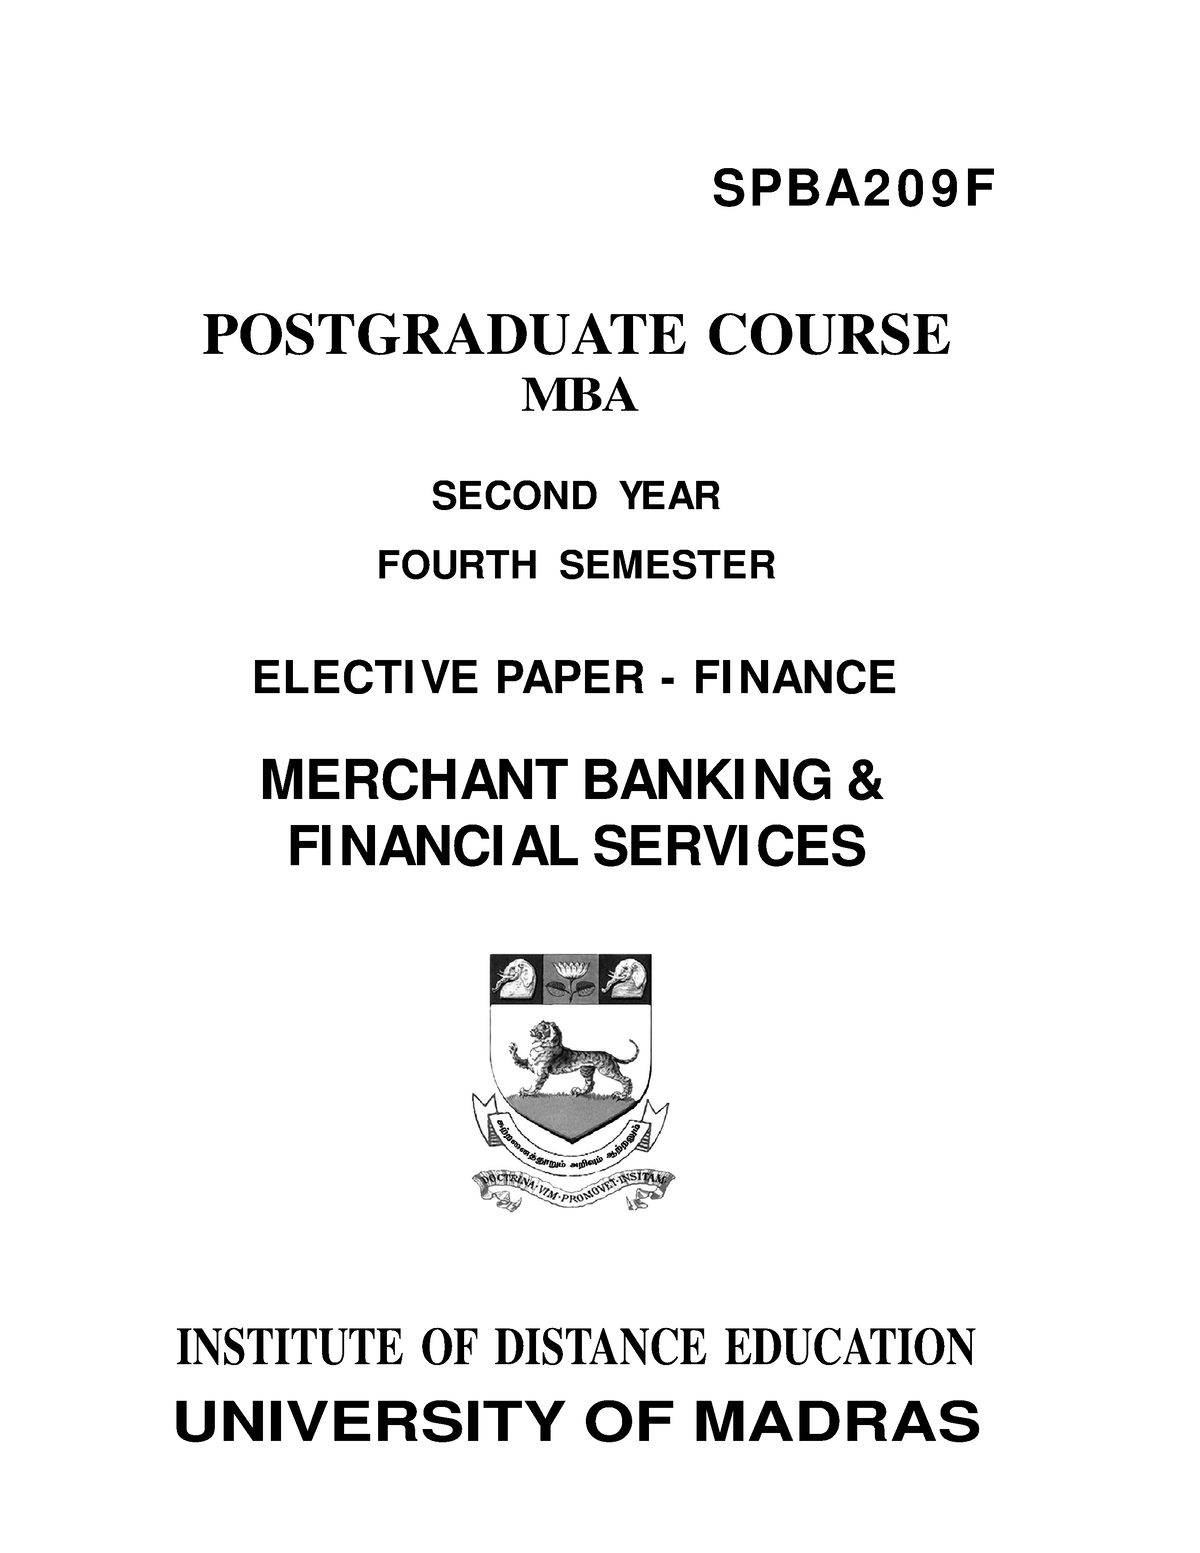 mba 2nd year assignment